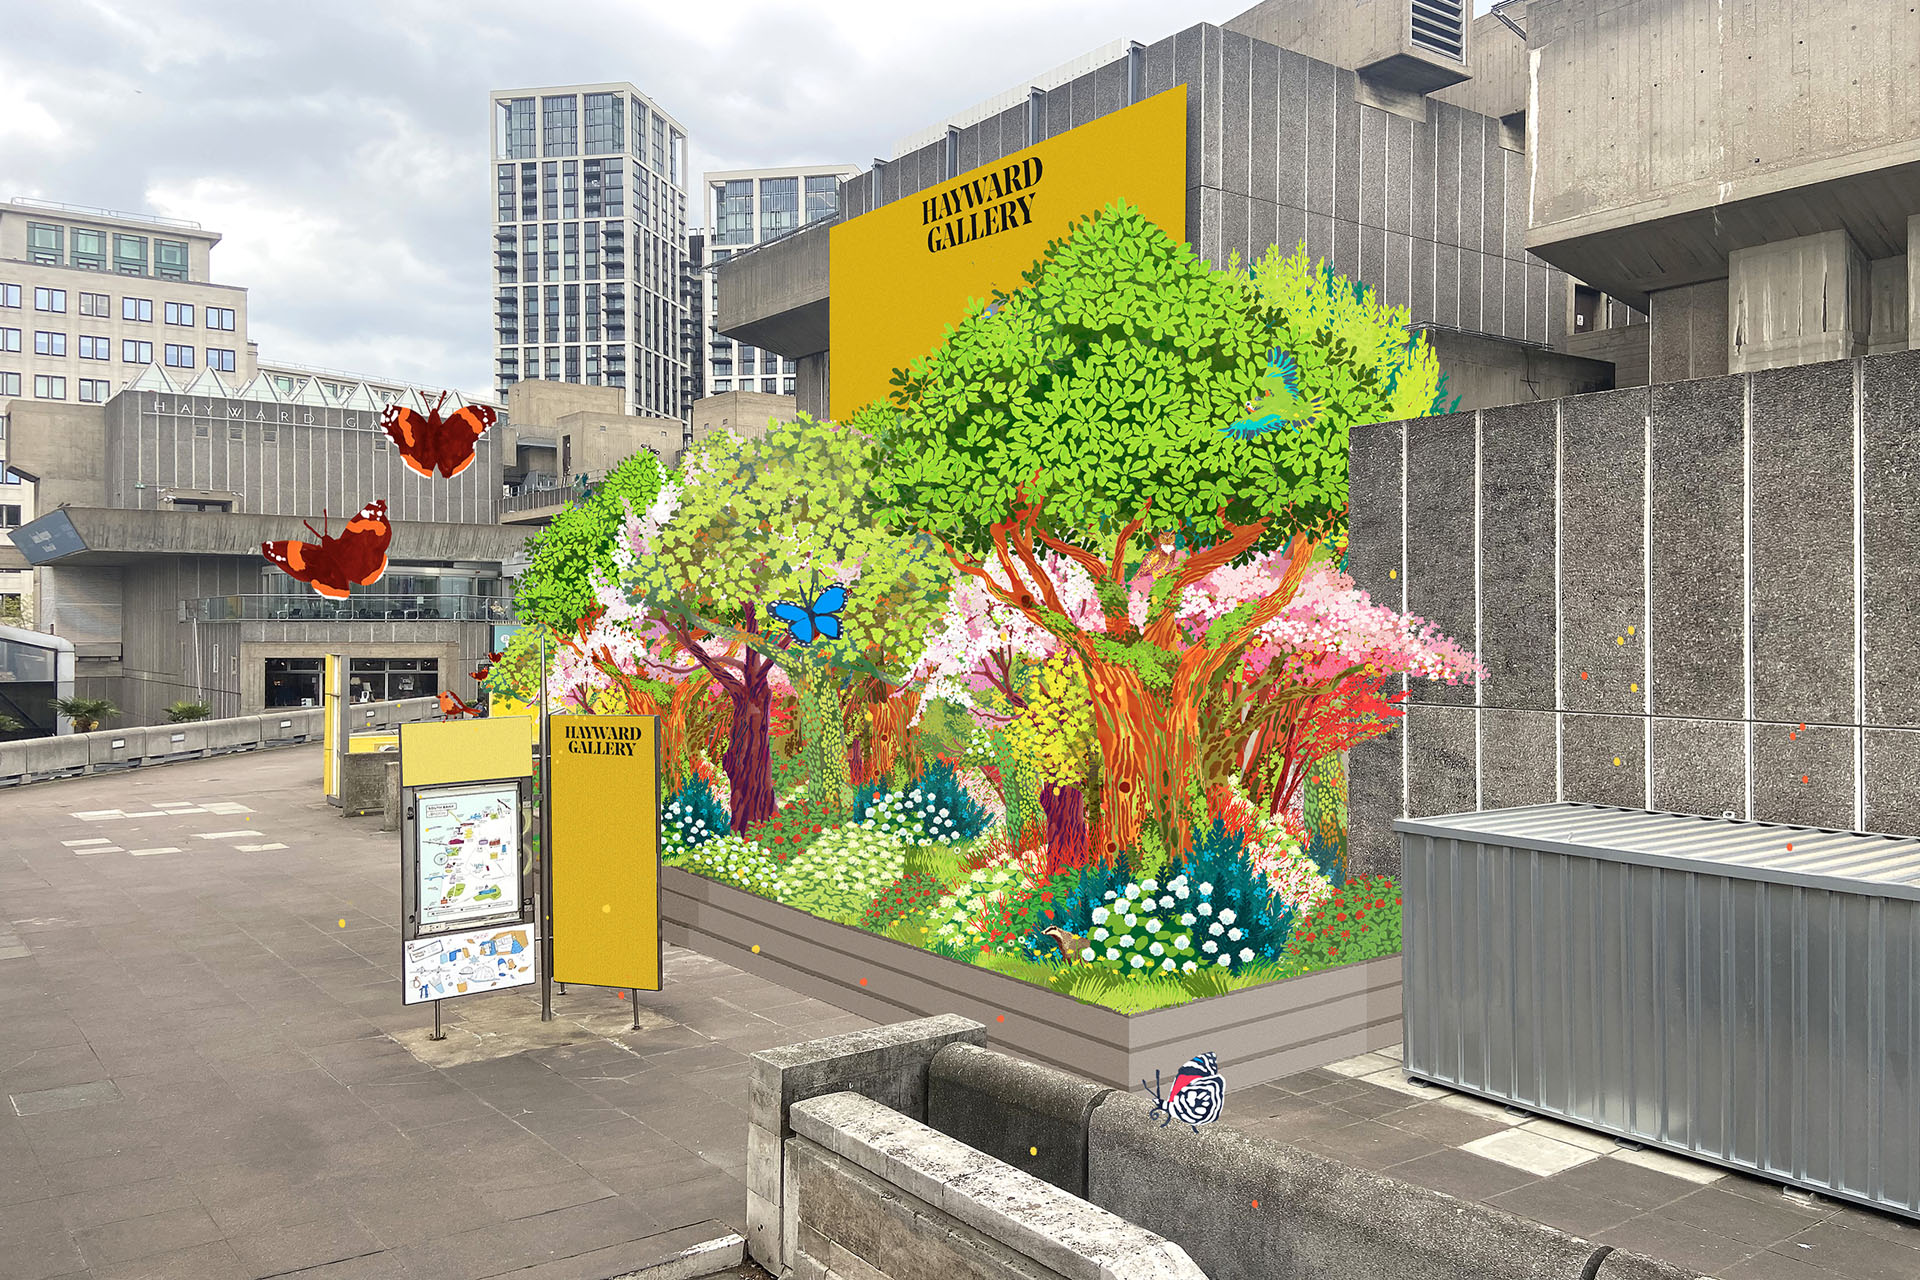 An illustration of SUGi's pocket forest at the Hayward Gallery